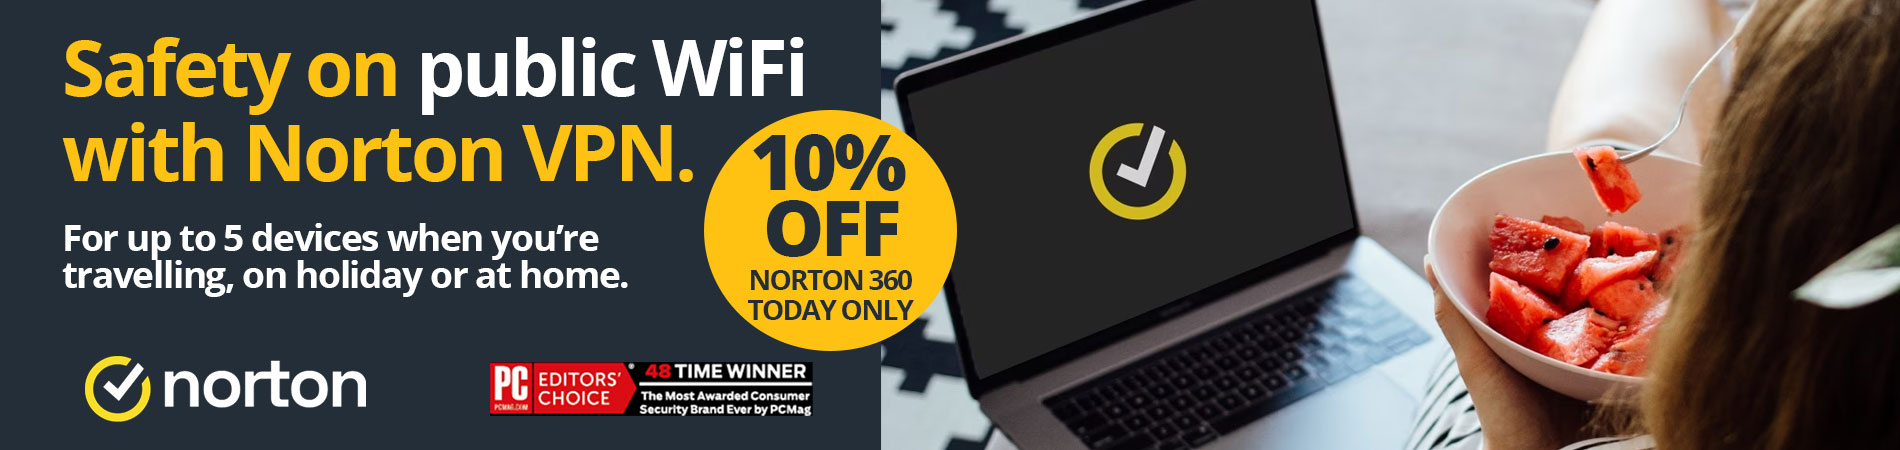 10% OFF TODAY - Safety on Public WiFi with Norton VPN